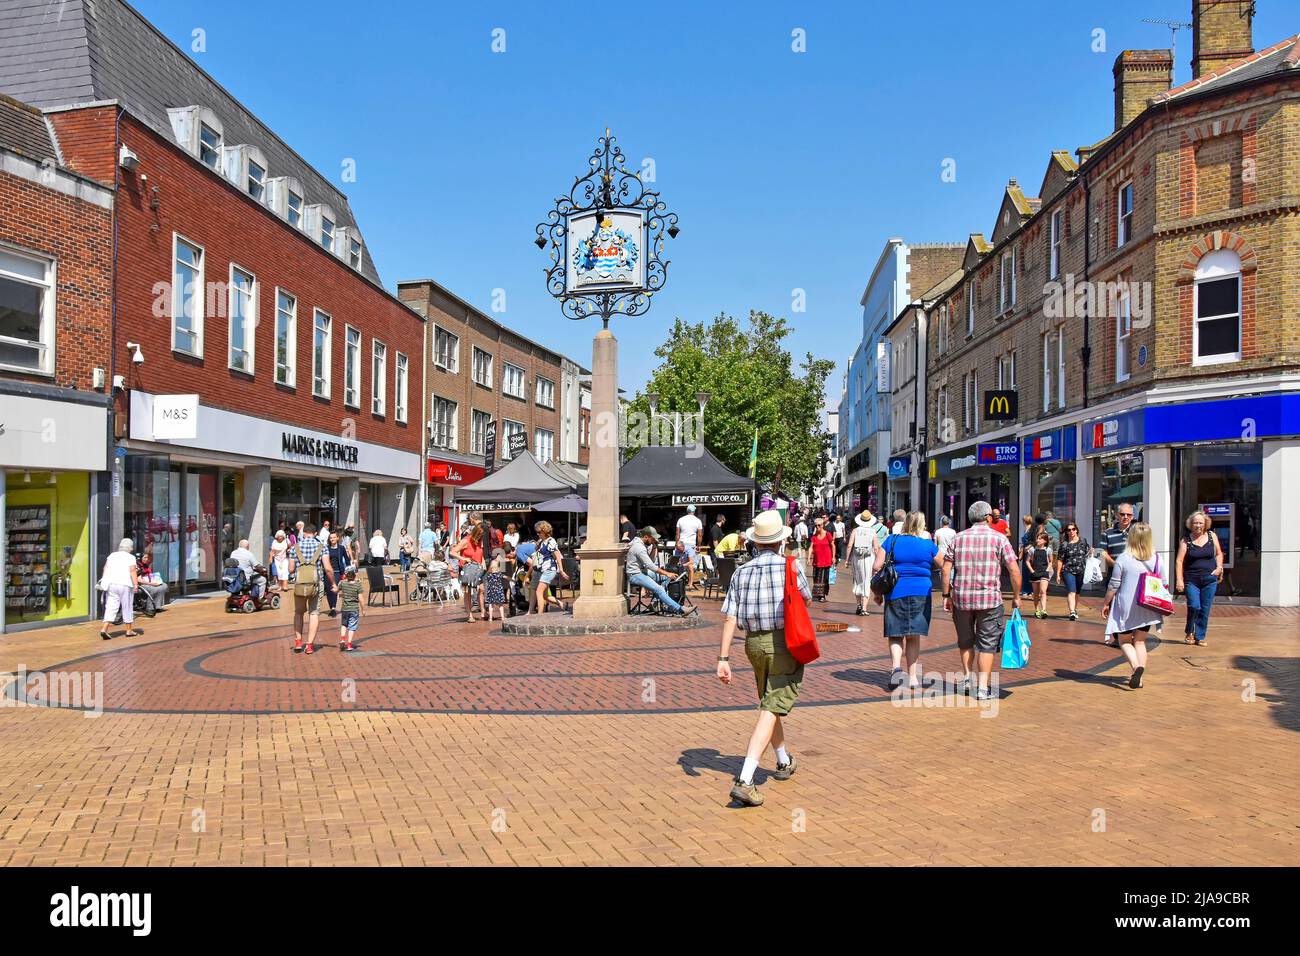 City of Chelmsford Essex county town sign with coat of arms blue sky summer day for people shoppers in paved busy pedestrian high street England UK Stock Photo